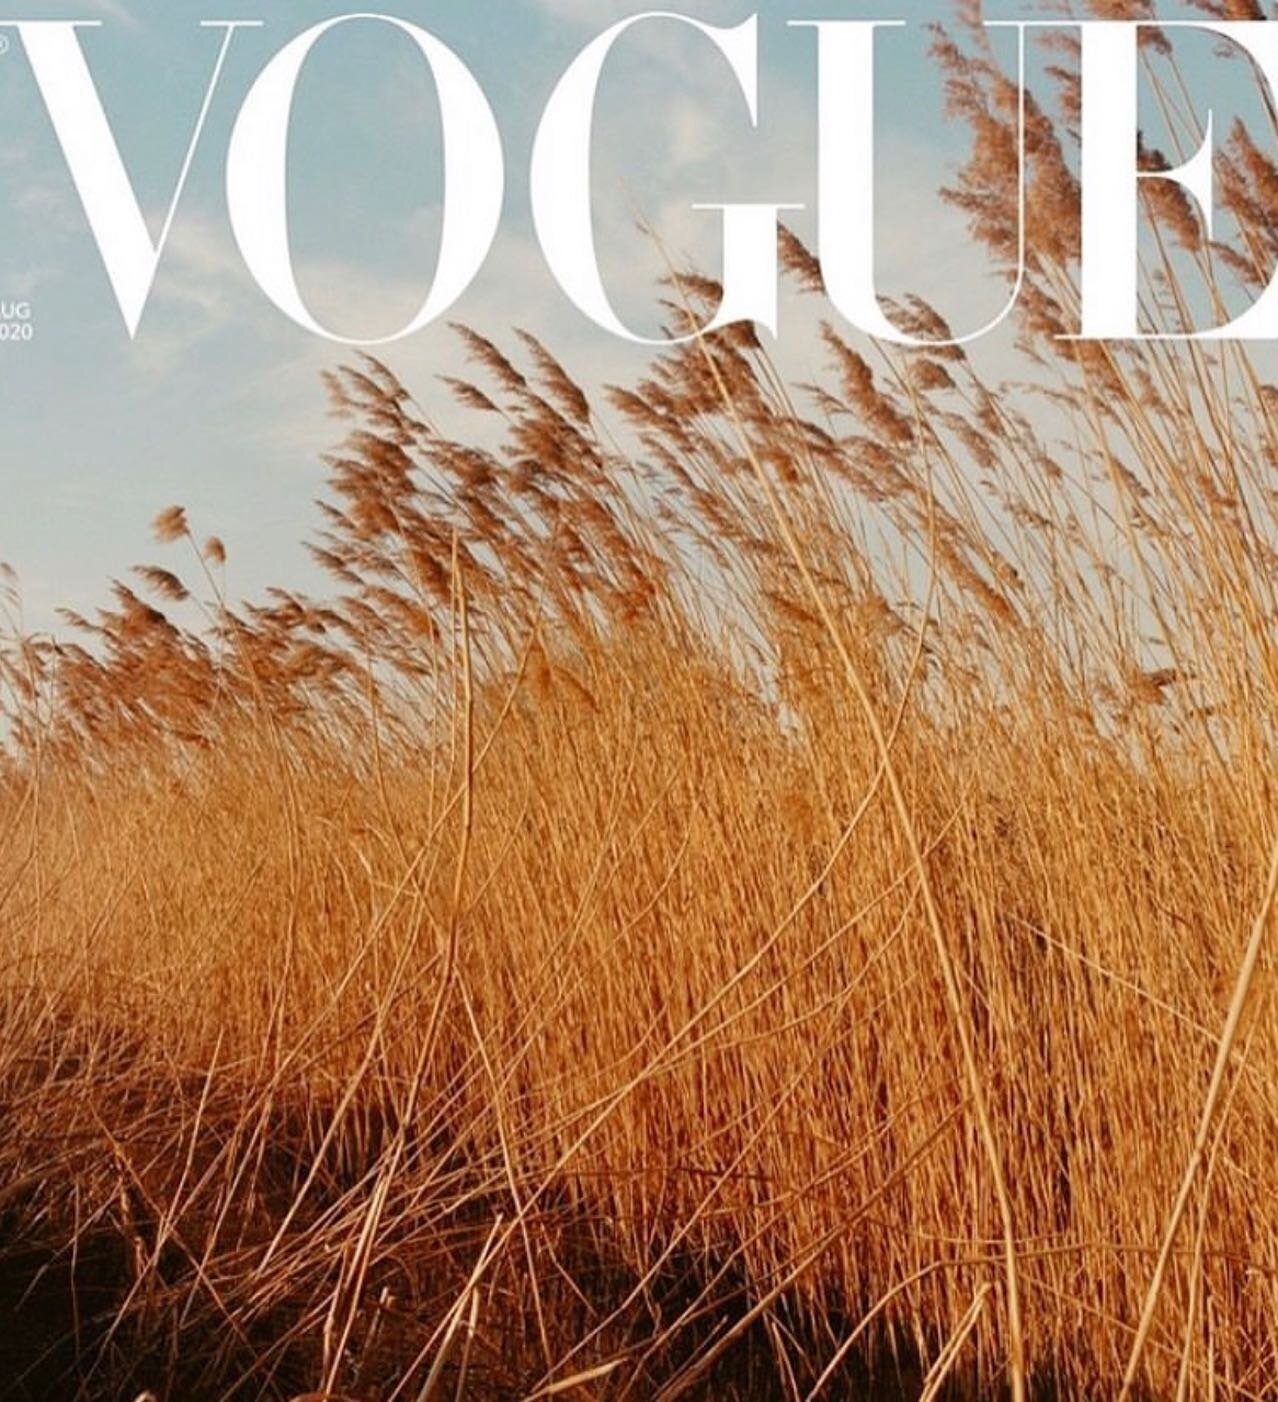 this @britishvogue august 2020 cover has us dreaming of golden wheat fields 🌾 captured on camera by #JamieHawkesworth 📷

#wheatfield #interiordesign #bedboards #bedhead #bedroomdecor